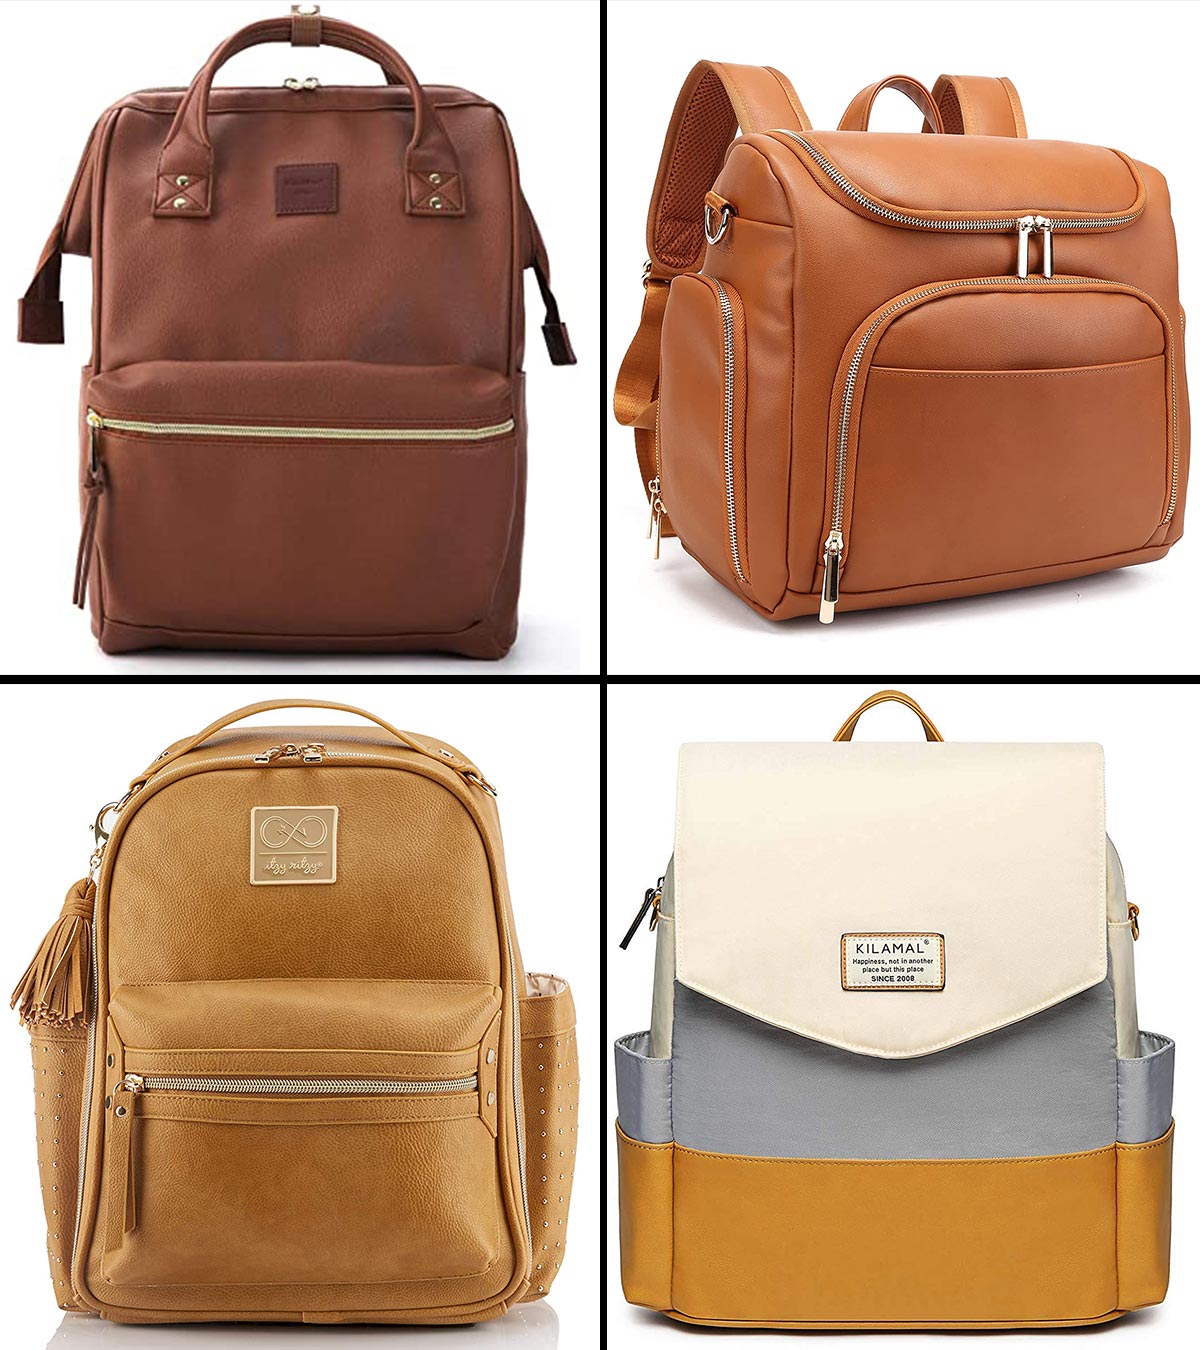 13 Best Leather Diaper Bags in 2023